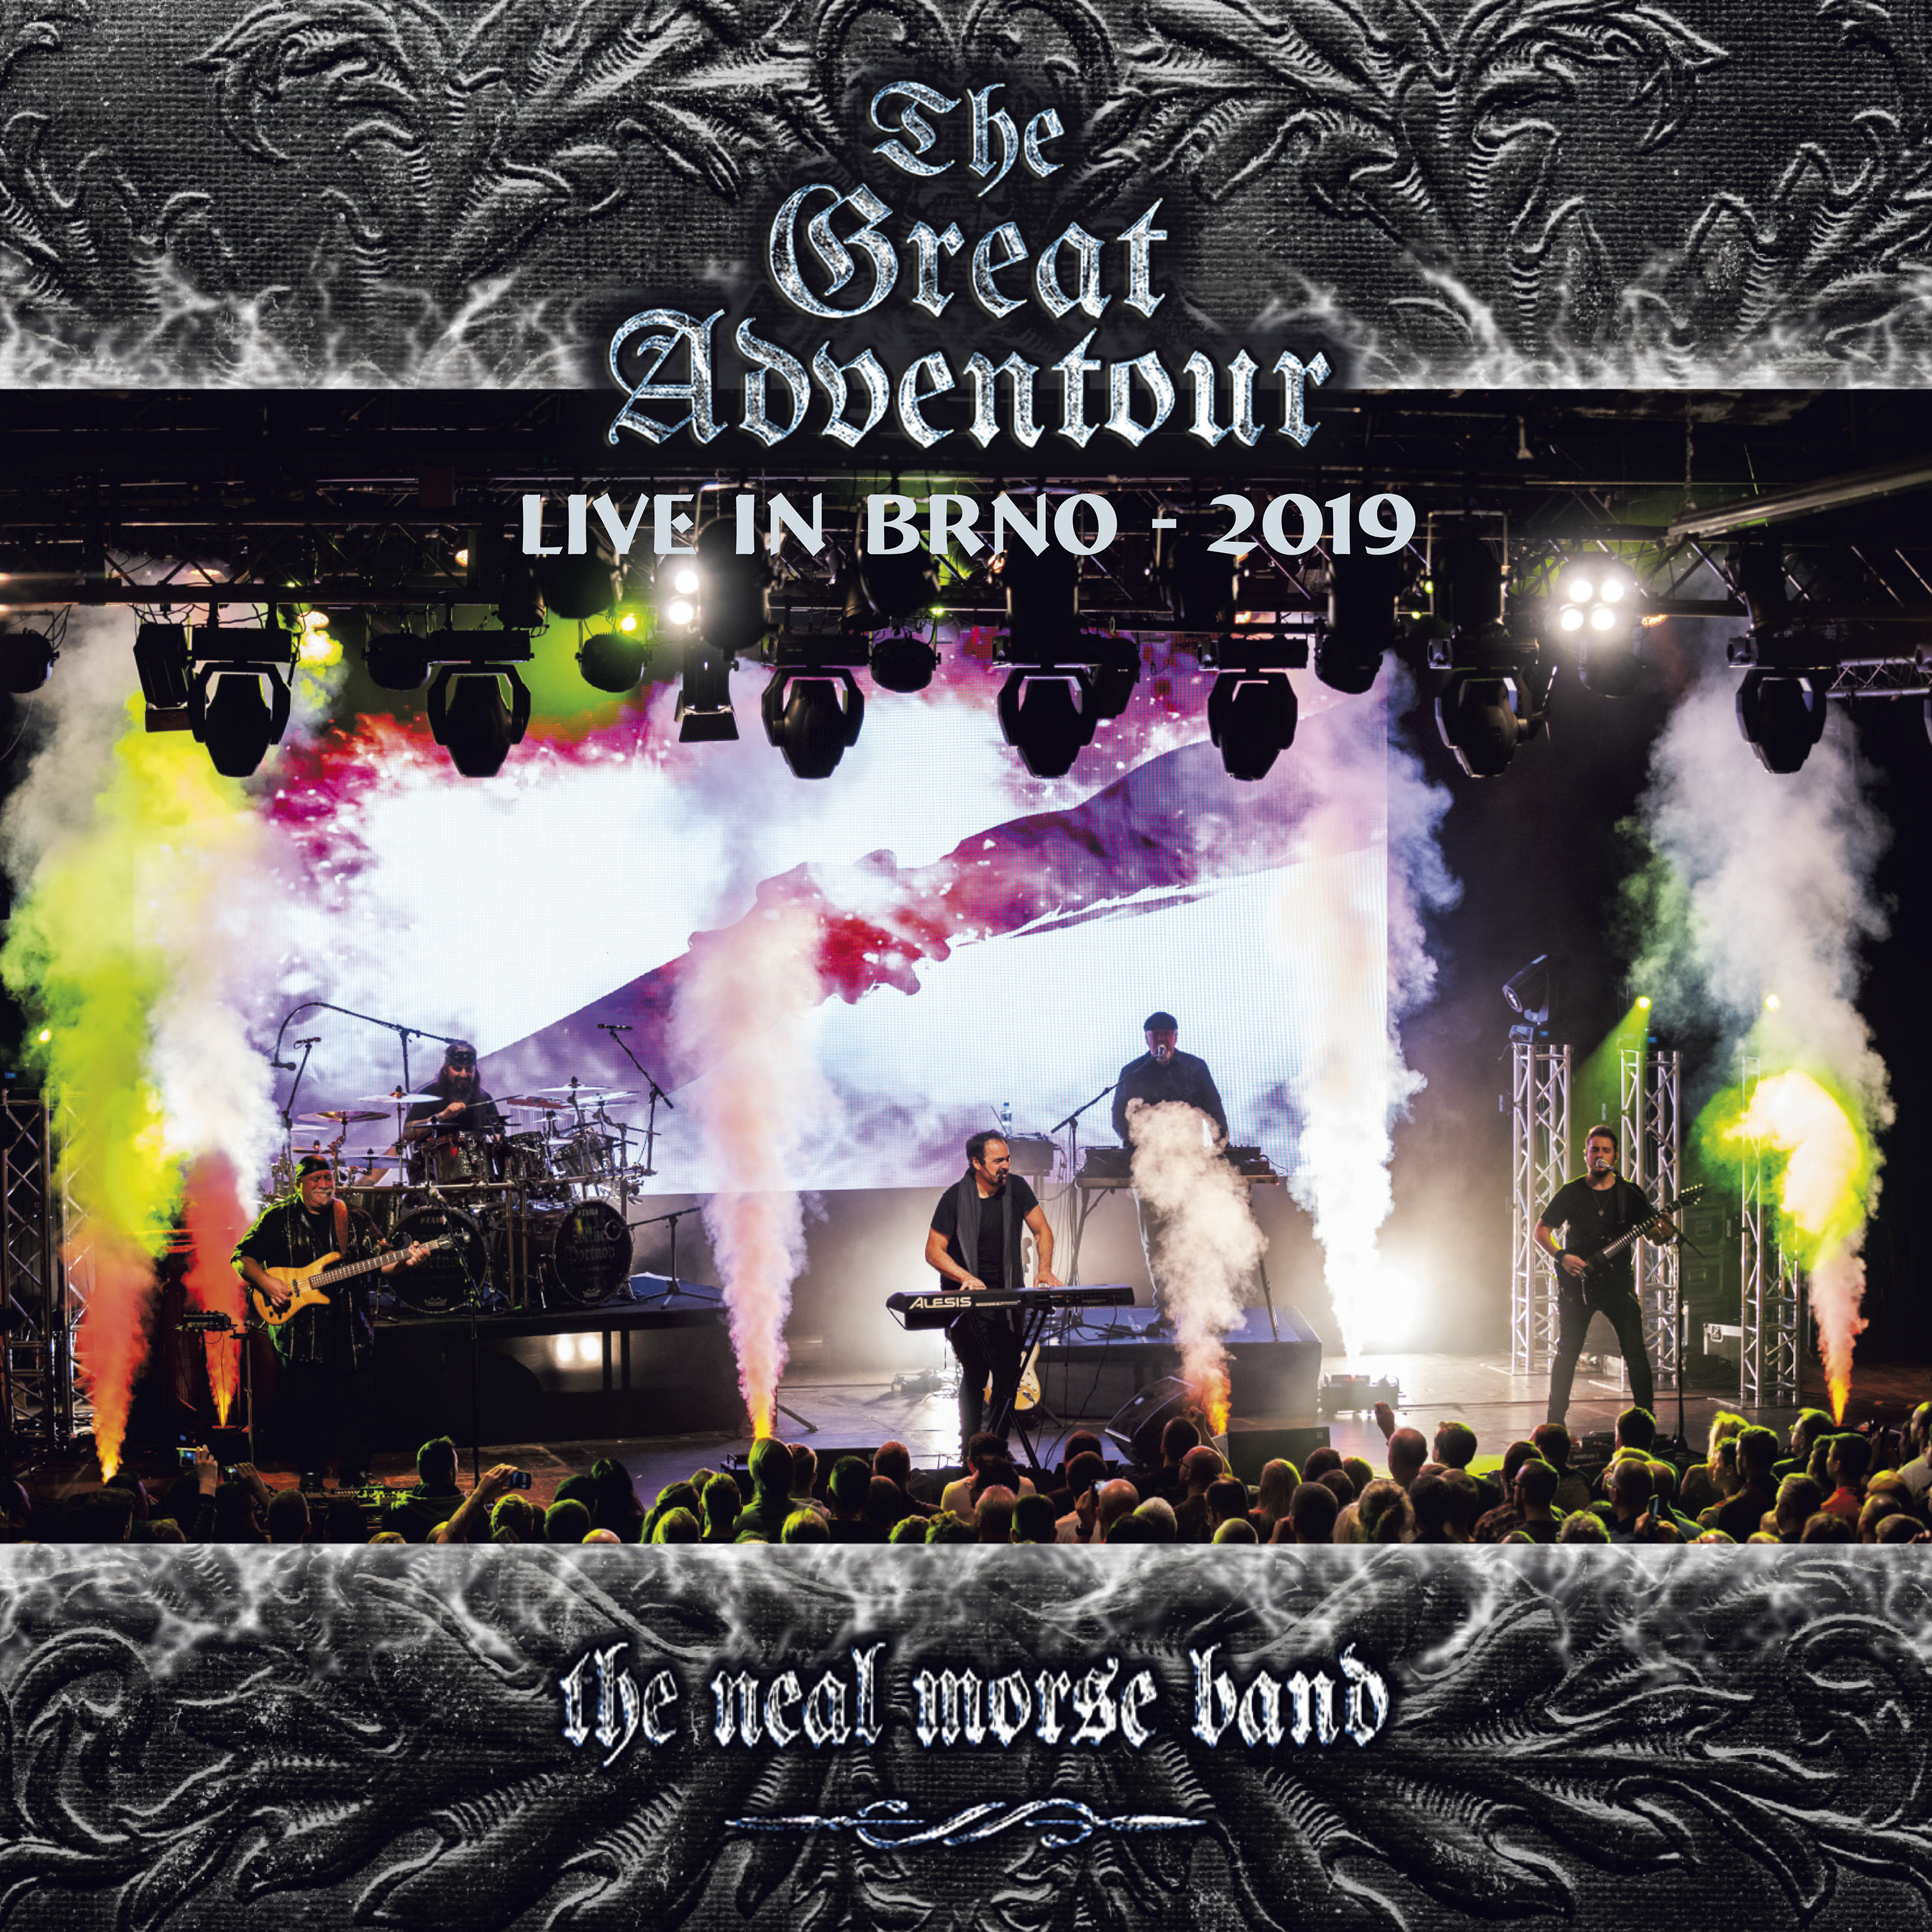 Neal Morse Band (USA) – The Great Adventour: Live In BRNO 2019